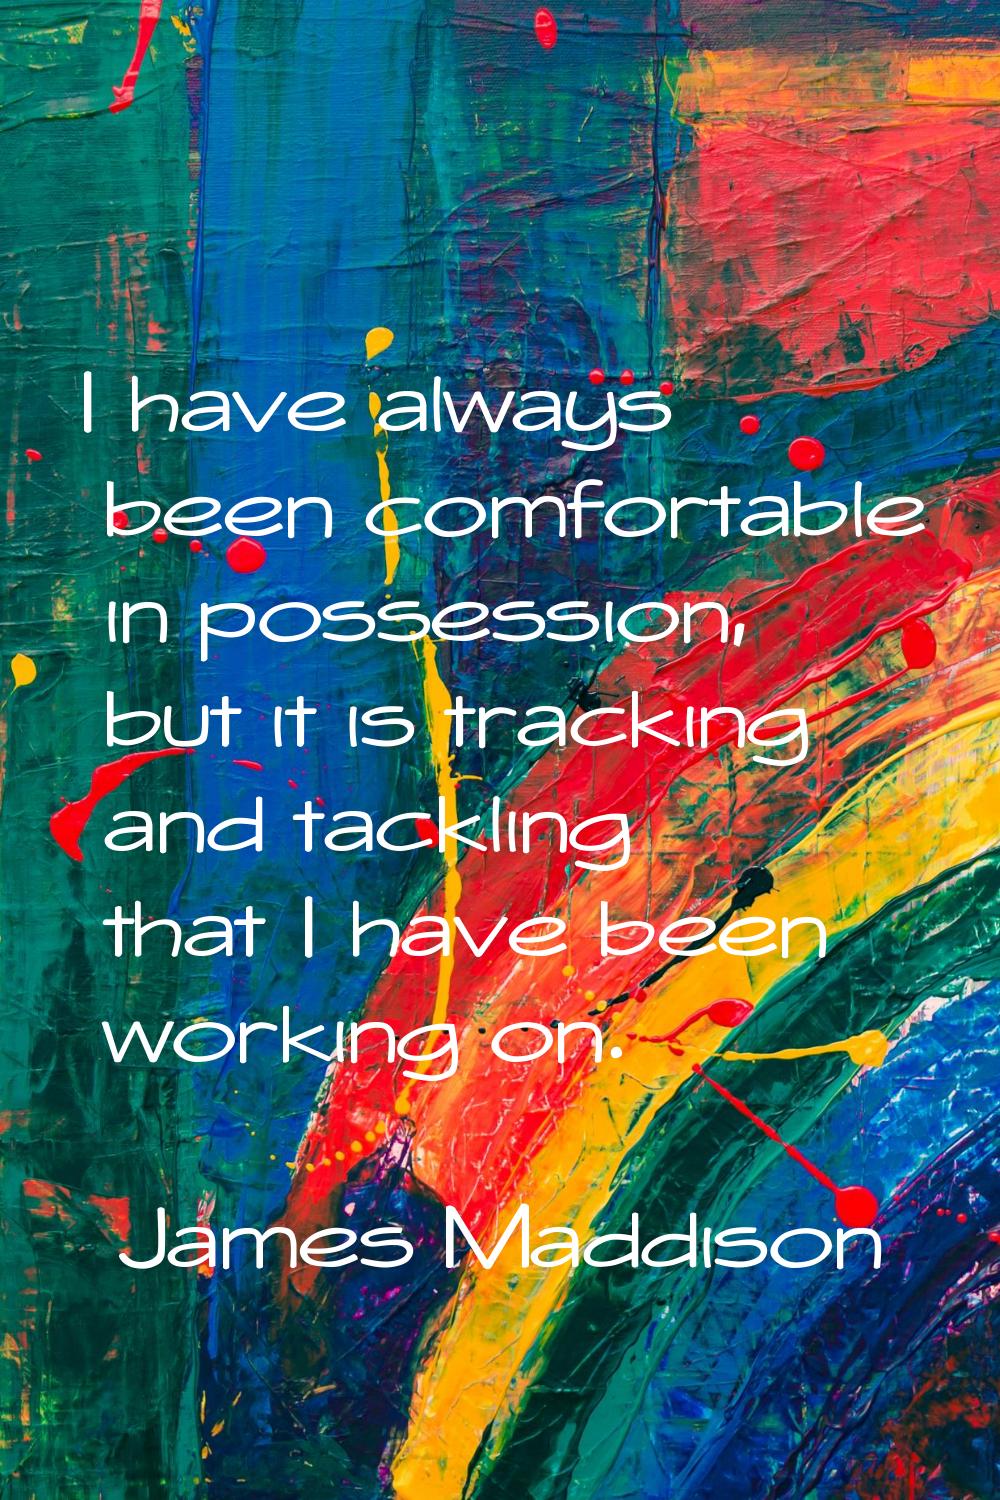 I have always been comfortable in possession, but it is tracking and tackling that I have been work